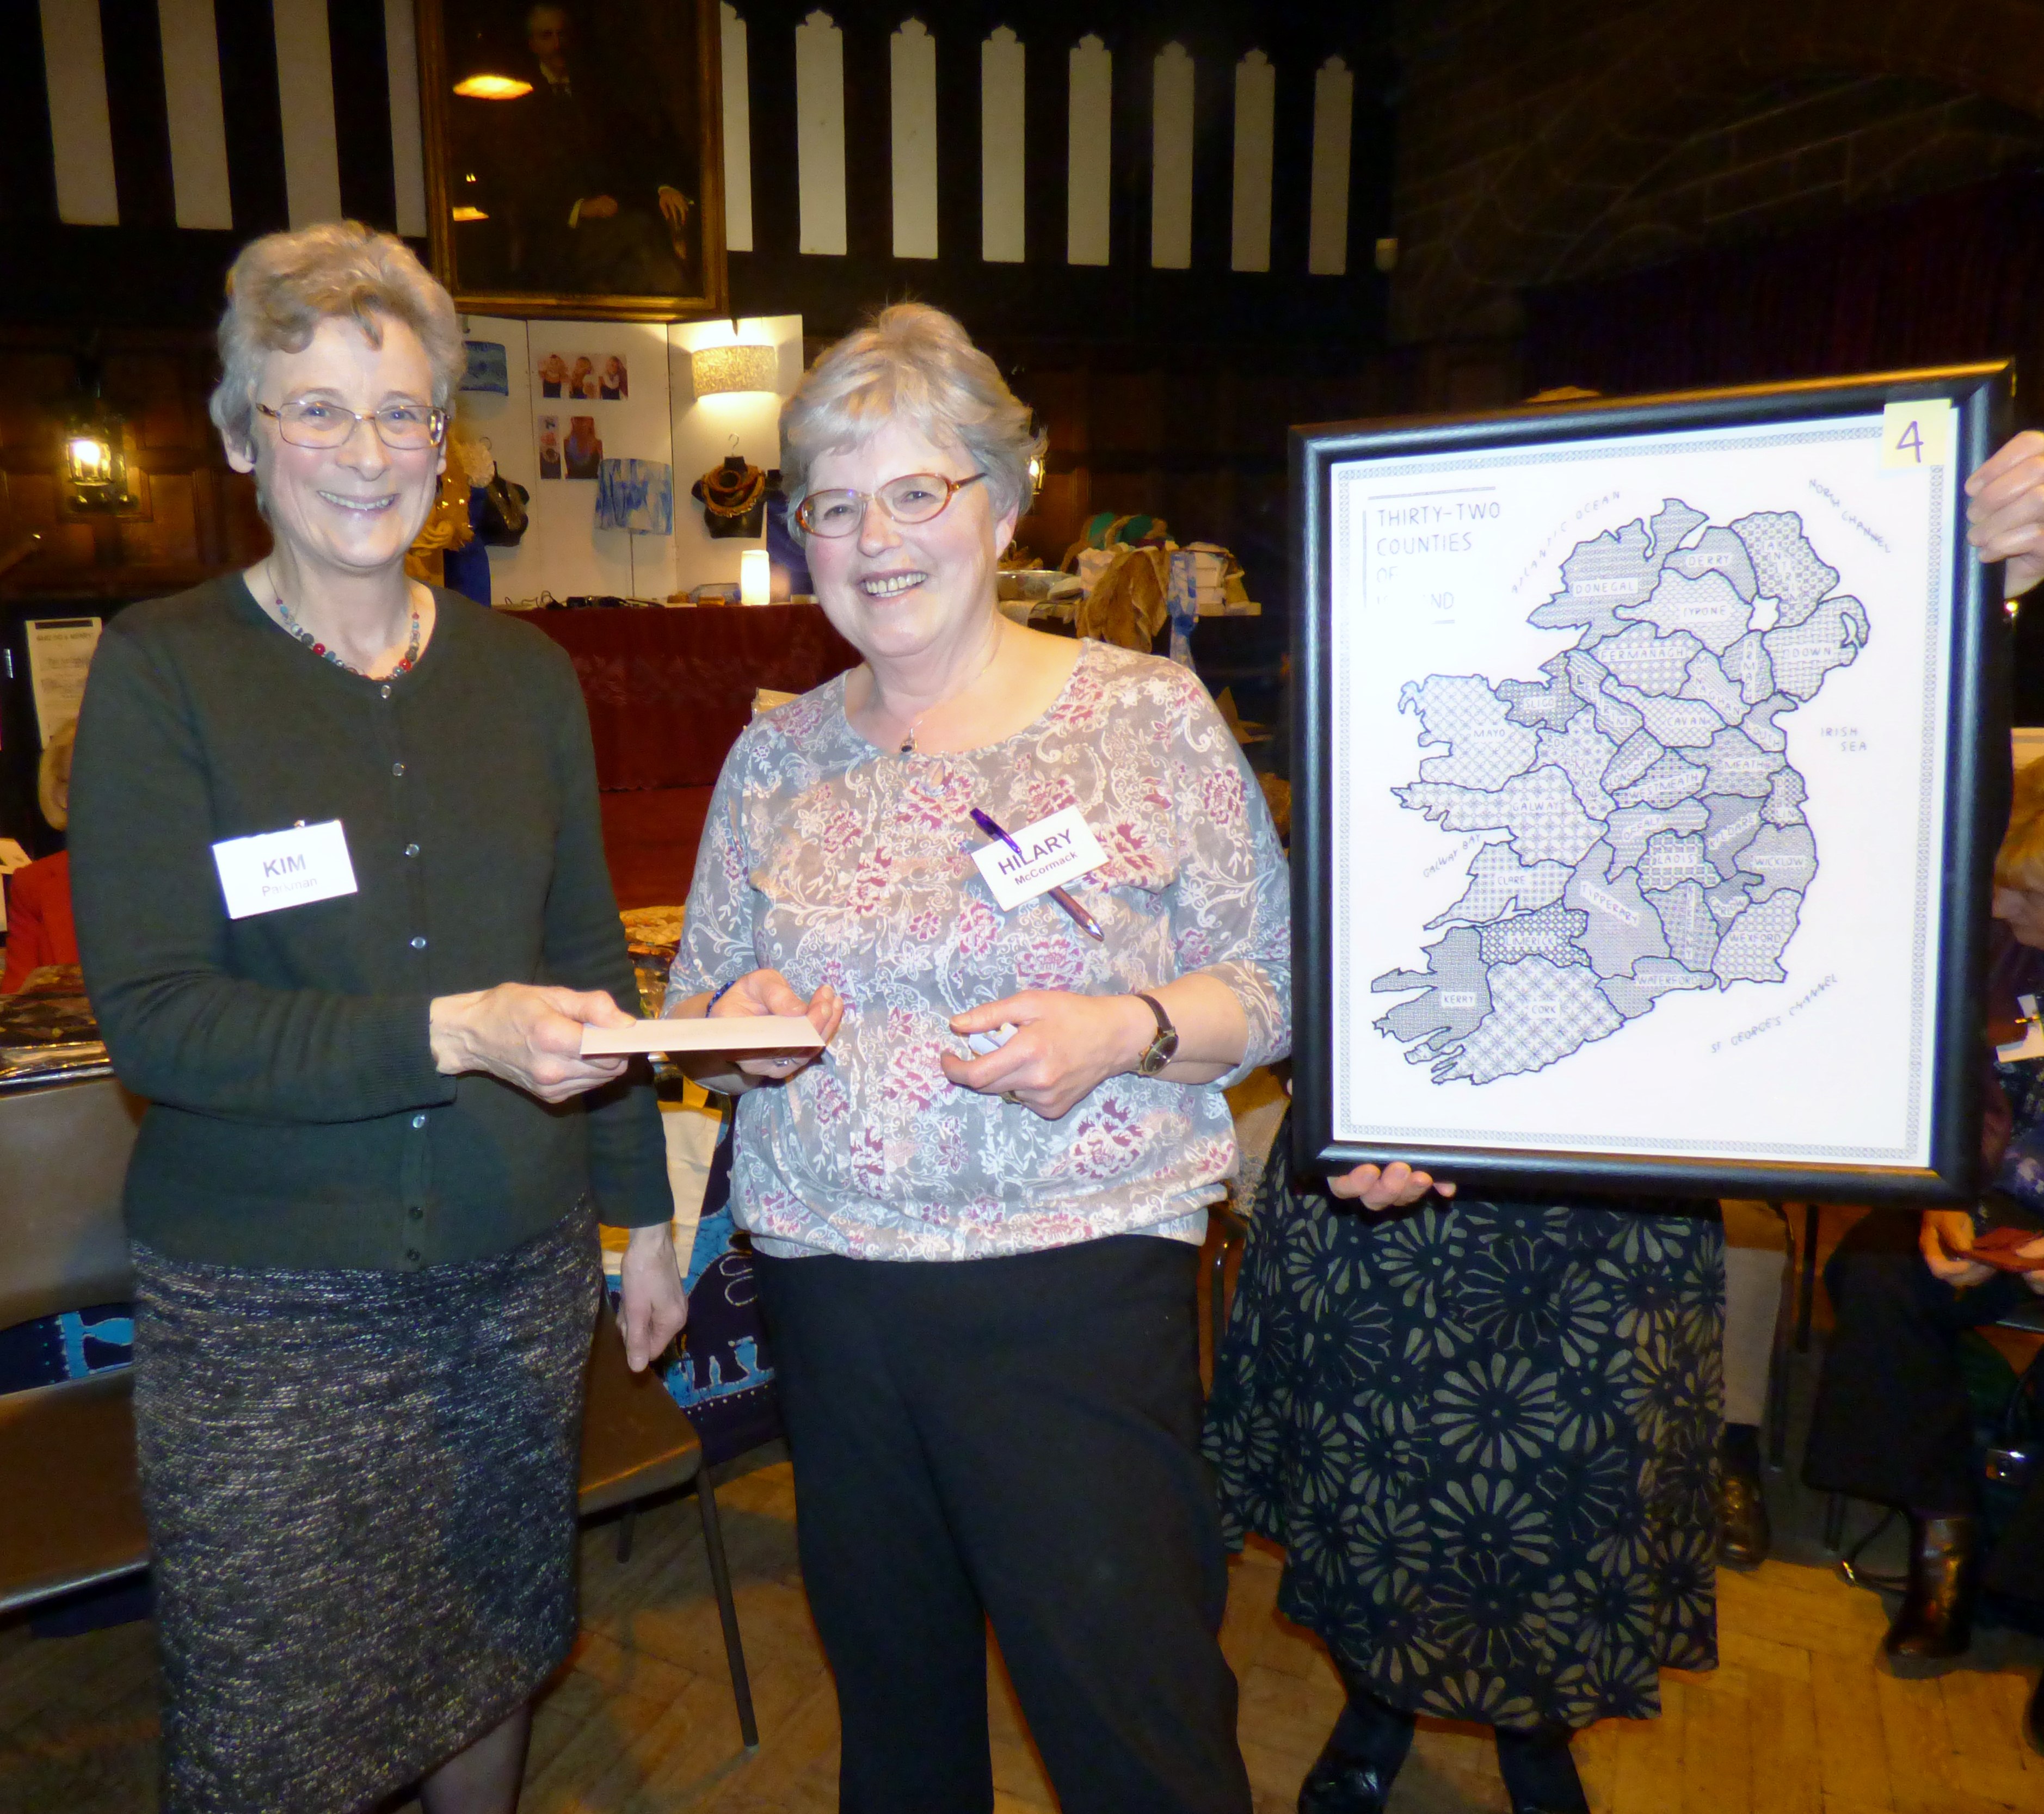 Hilary McCormack with her winning entry to Traditional Stitch Competition at MEG Winter Fair 2016